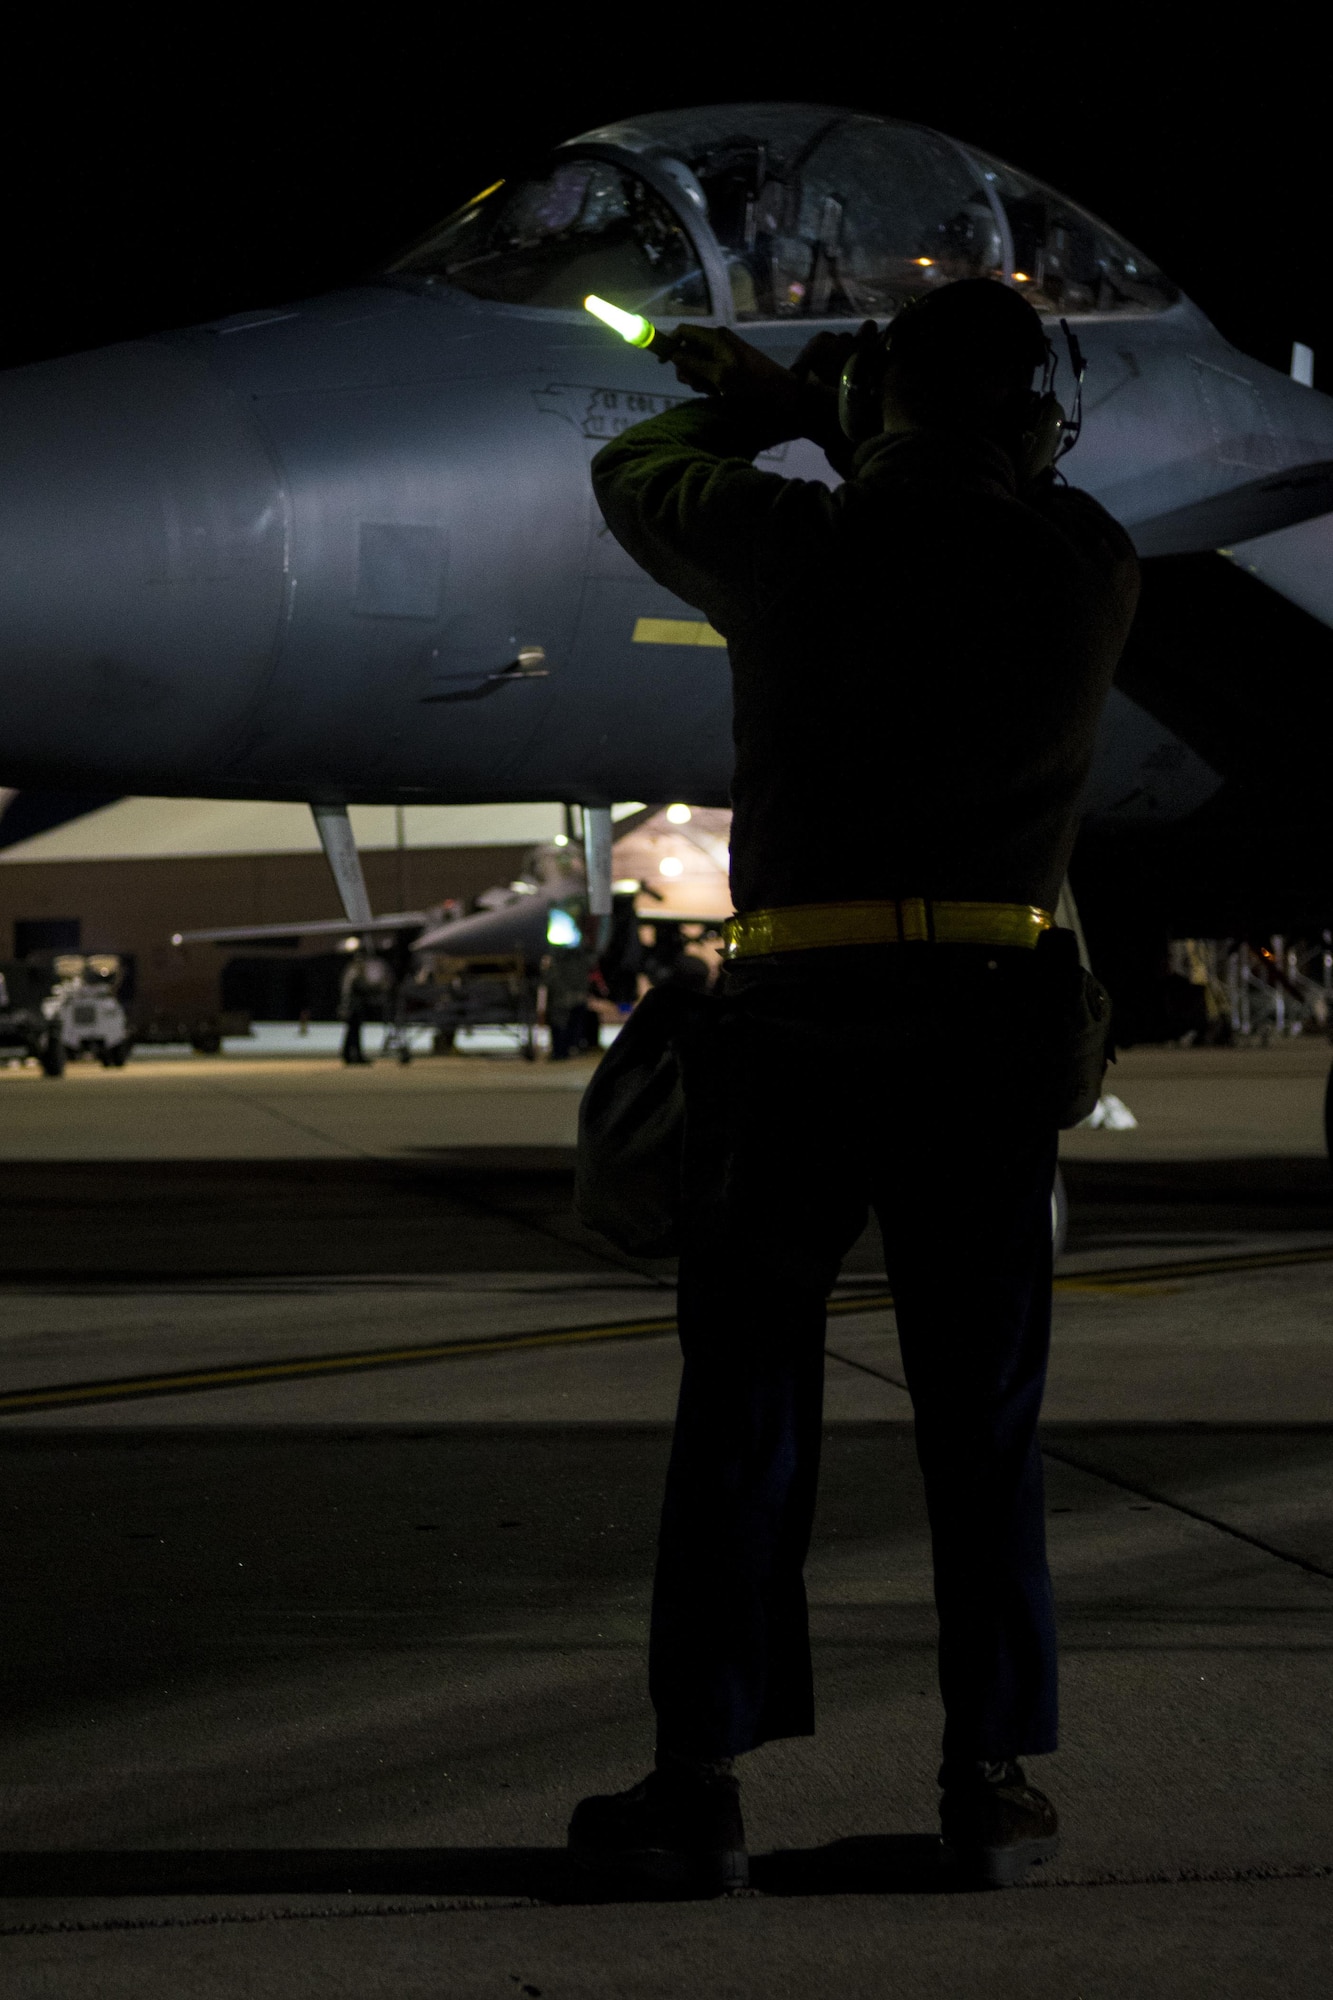 Senior Airman Joshua Sprinkle, 4th Aircraft Maintenance Squadron crew chief, prepares to marshal an F-15E Strike Eagle during exercise Coronet Warrior 17-01, Jan. 31, 2017, at Seymour Johnson Air Force Base, North Carolina. Airmen assigned to the 4th AMXS performed 24-hour operations during the duration of the exercise. (U.S. Air Force photo by Airman Shawna L. Keyes)